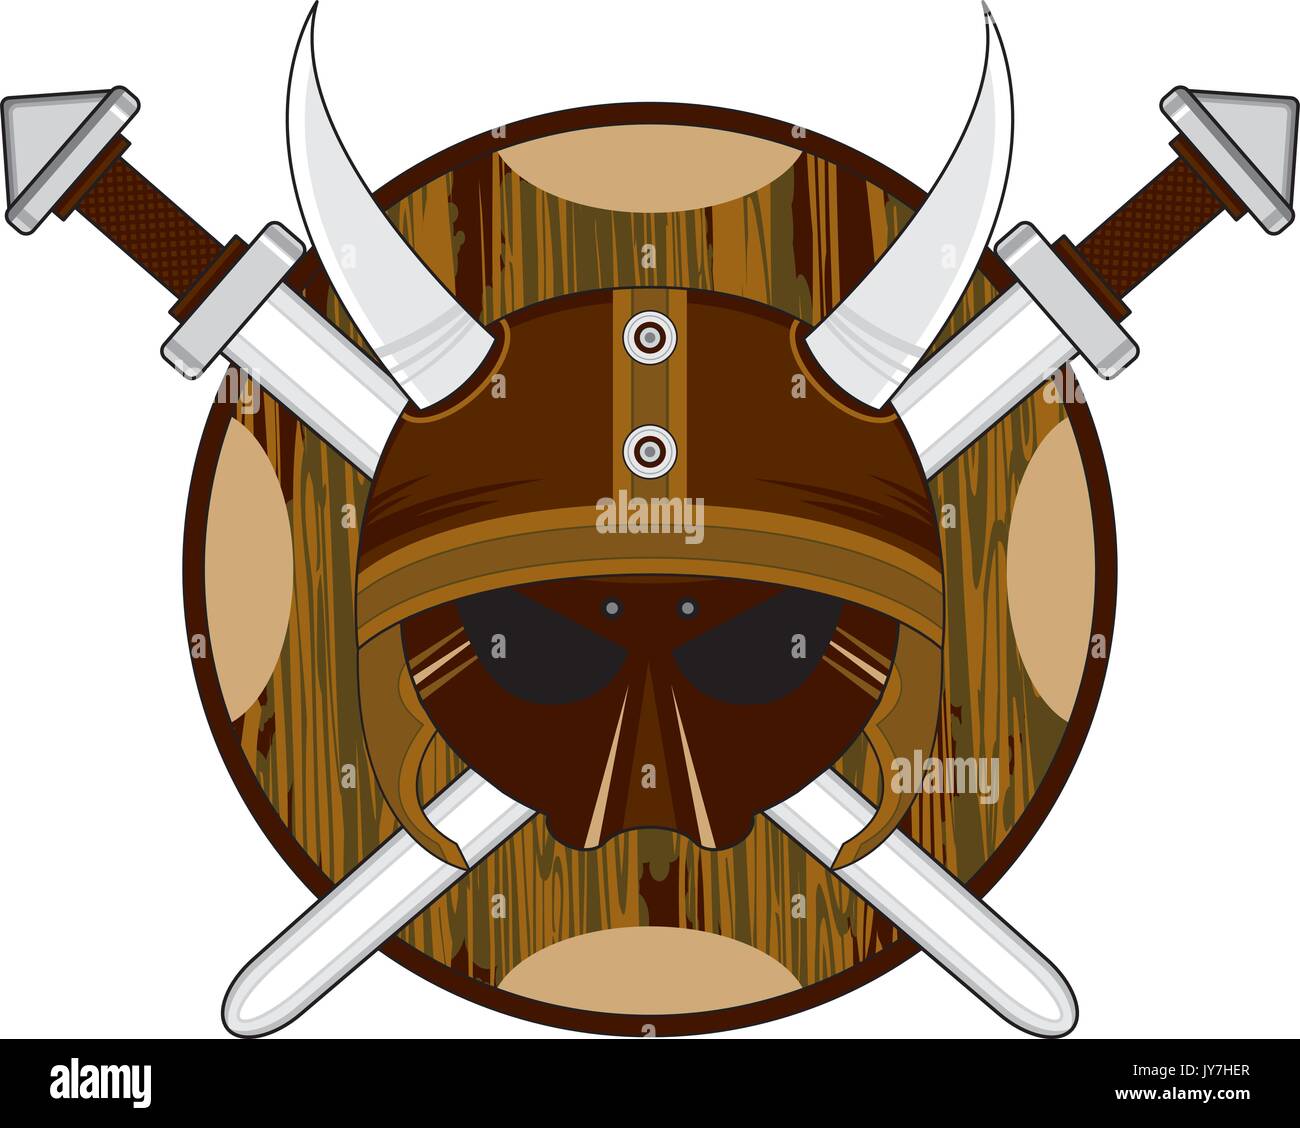 Cartoon Norse Viking Warrior Helmet with Shields and Crossed Swords Illustration Stock Vector